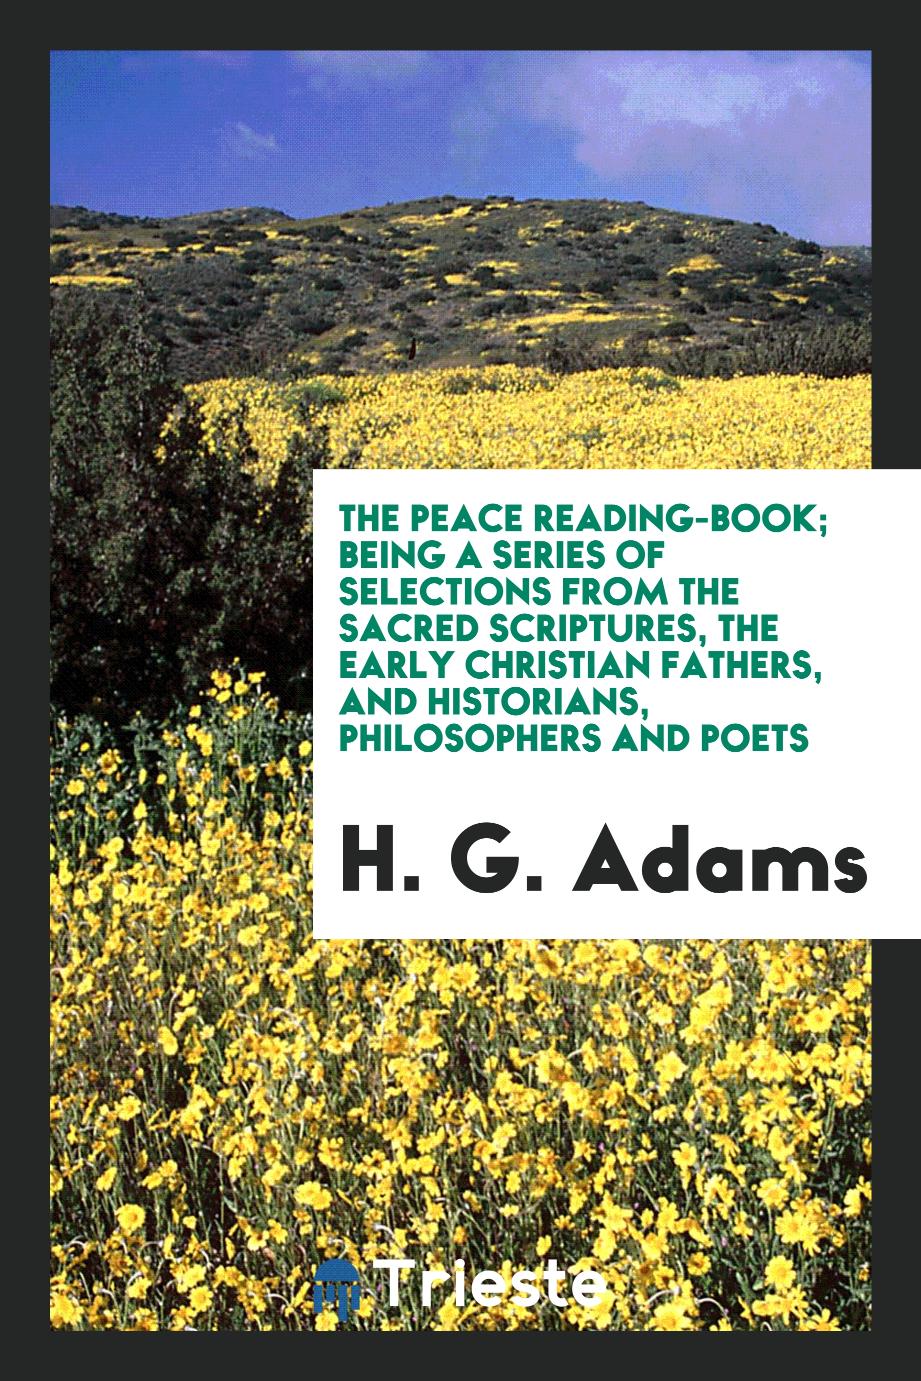 The Peace Reading-Book; Being a Series of Selections from the Sacred Scriptures, the Early Christian Fathers, and Historians, Philosophers and Poets